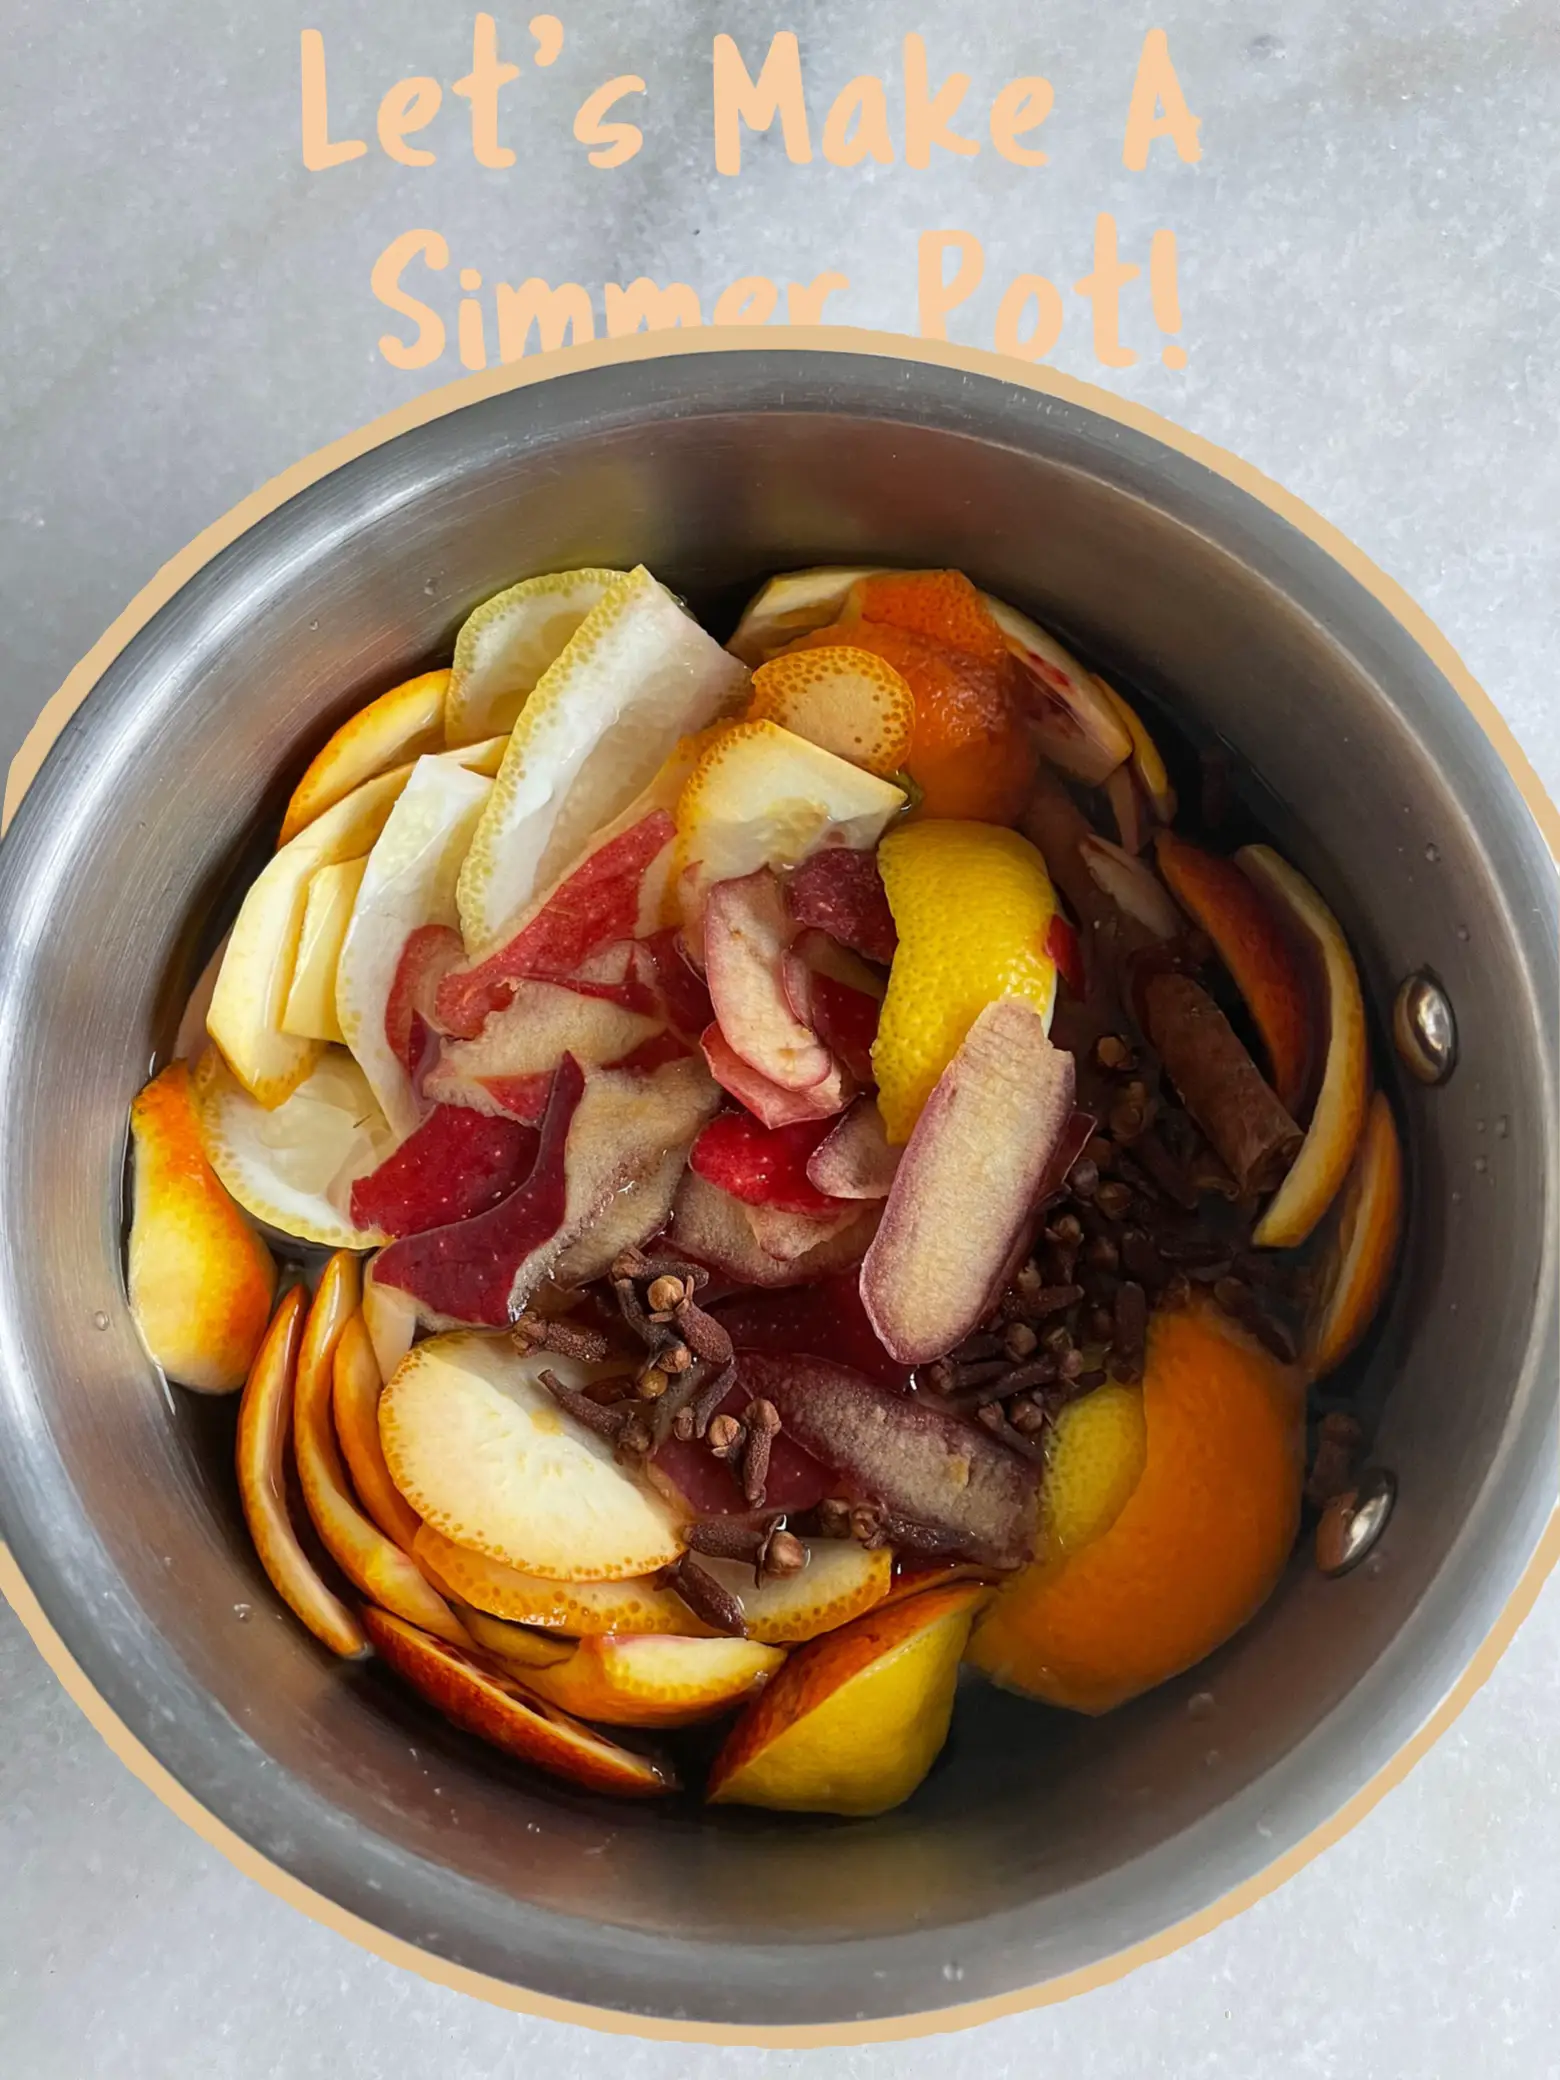 Fall Simmer Pot Recipes - Know Your Produce